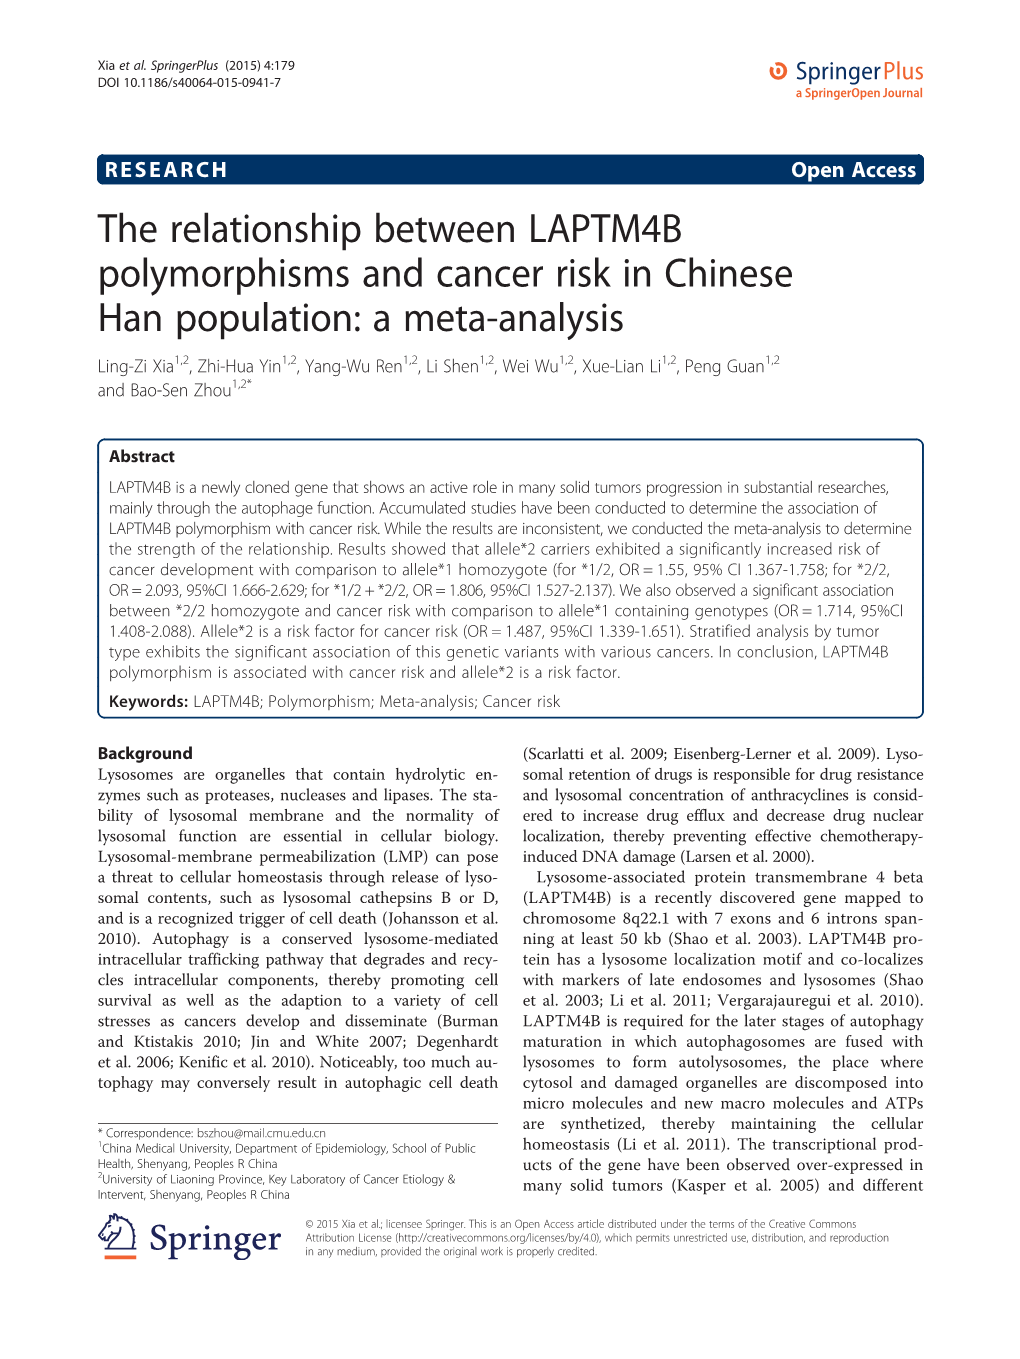 The Relationship Between LAPTM4B Polymorphisms and Cancer Risk In